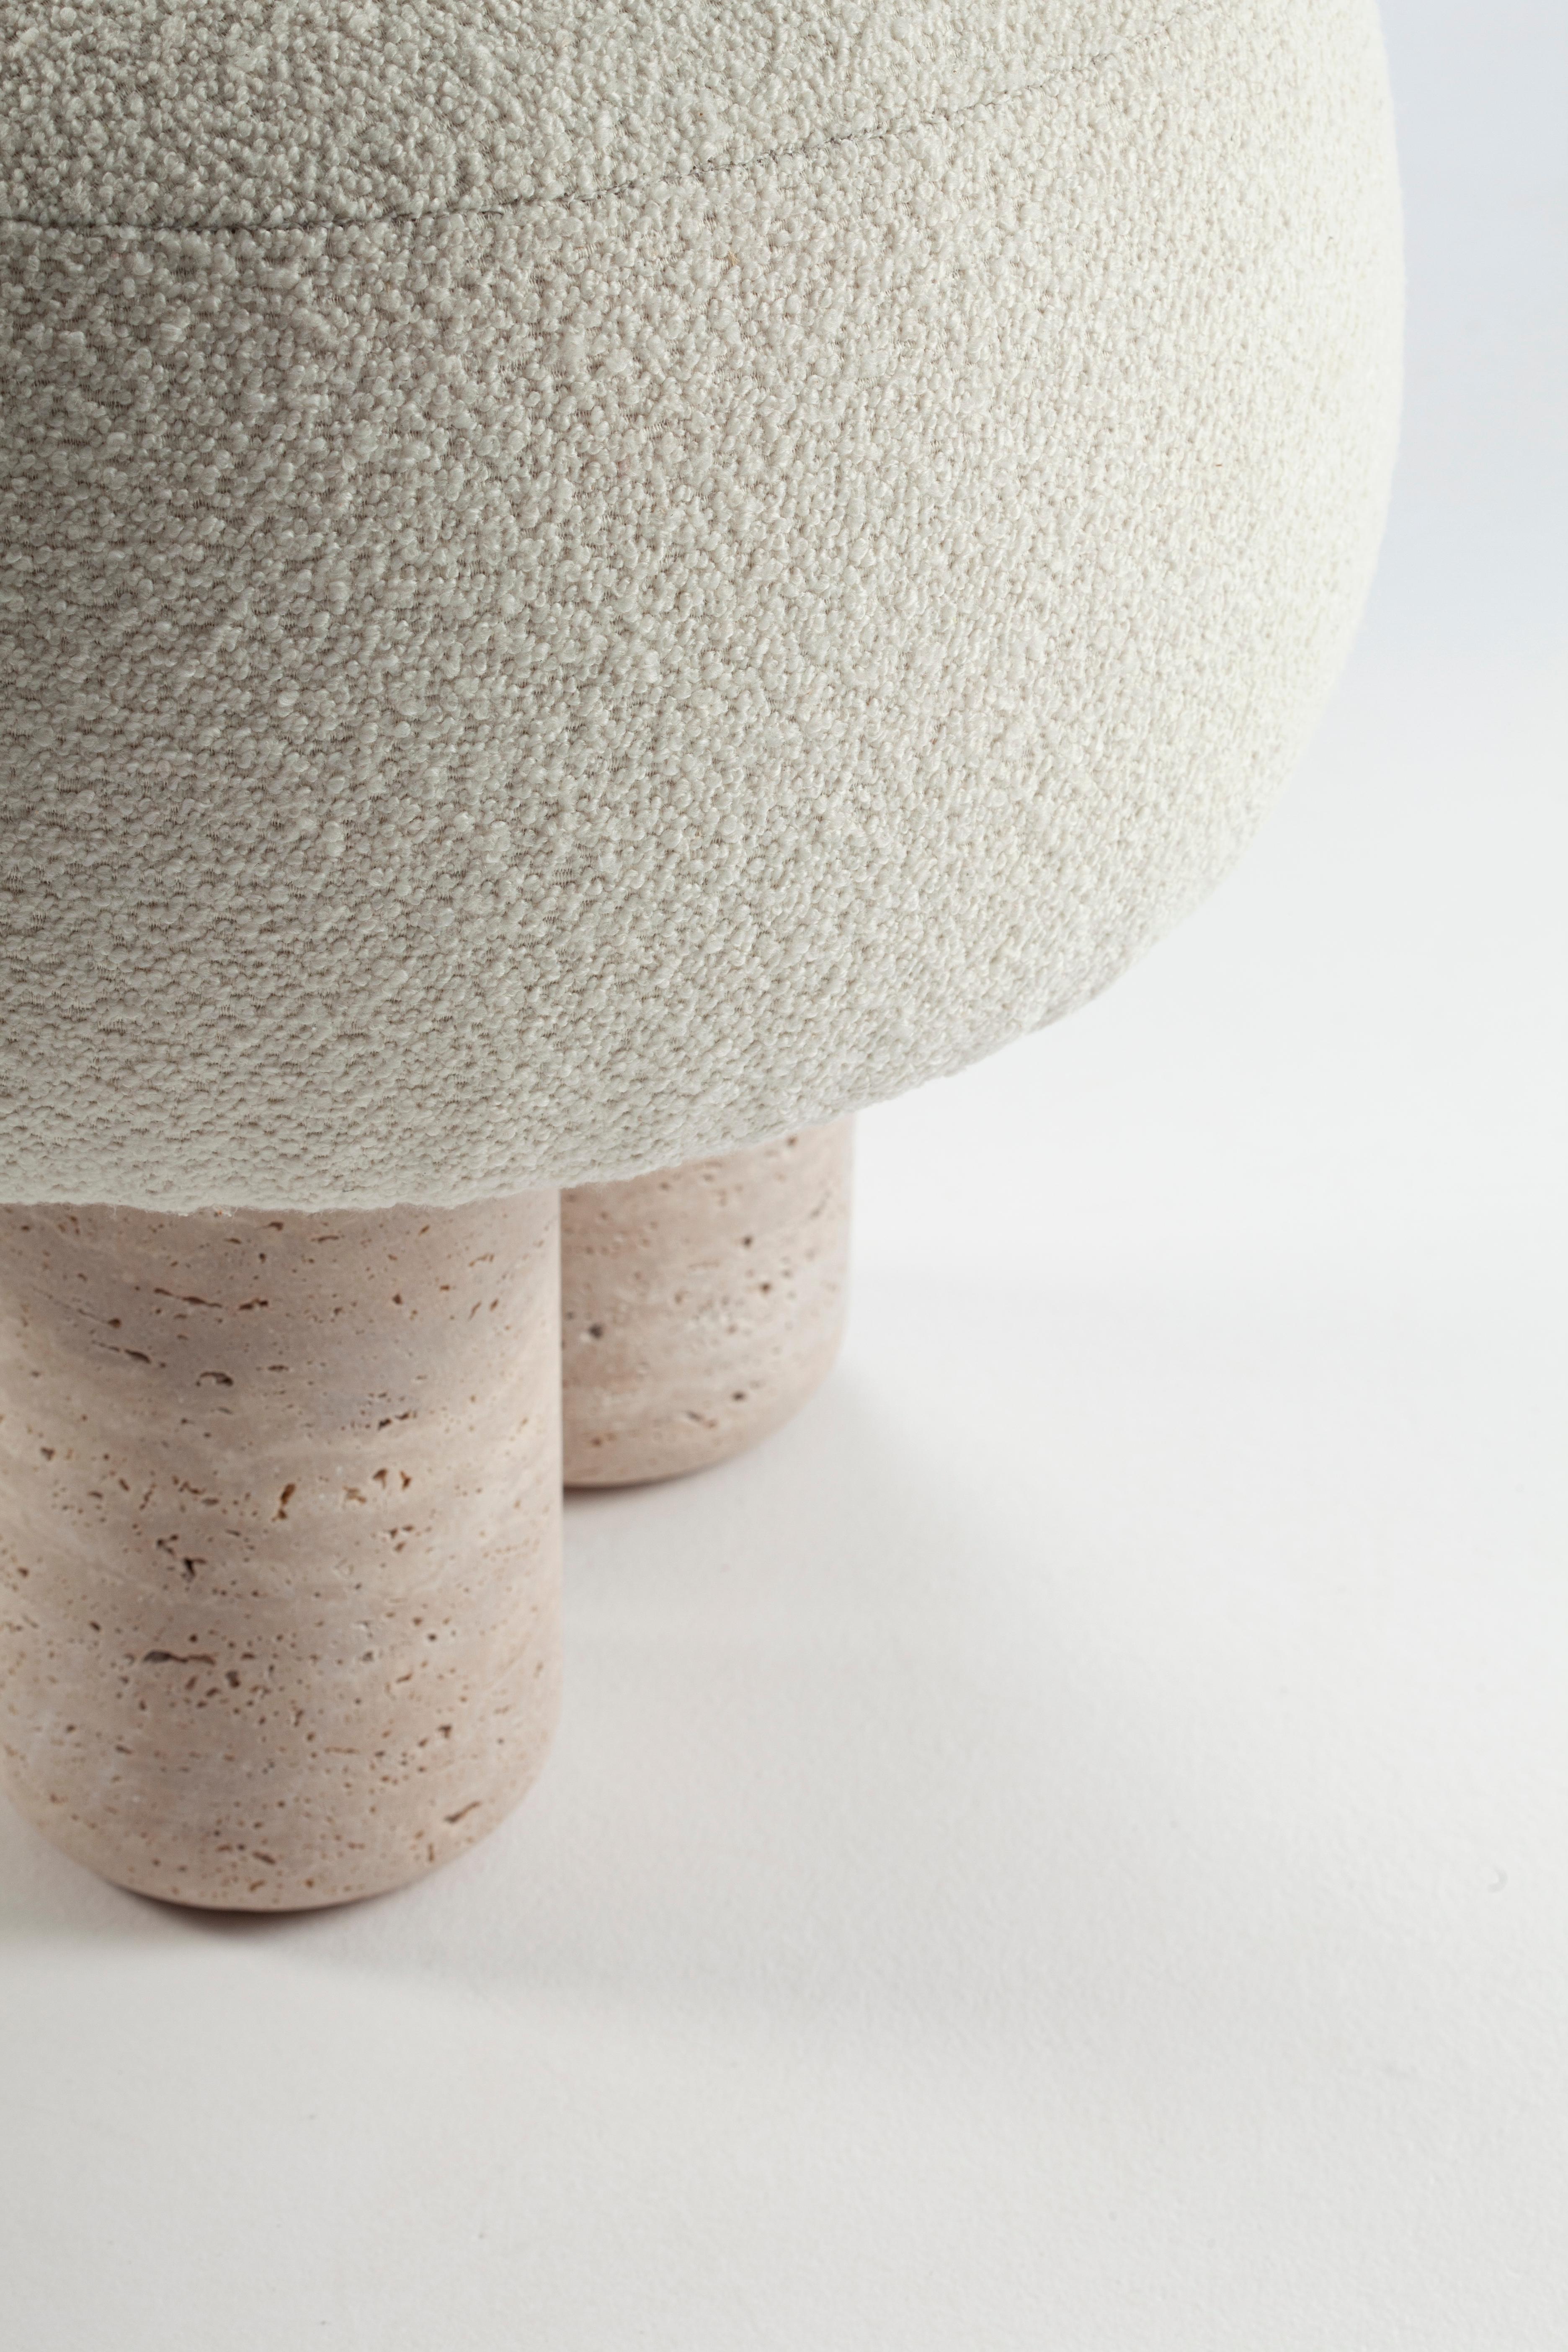 Post-Modern Unique Hygge Stool by Collector